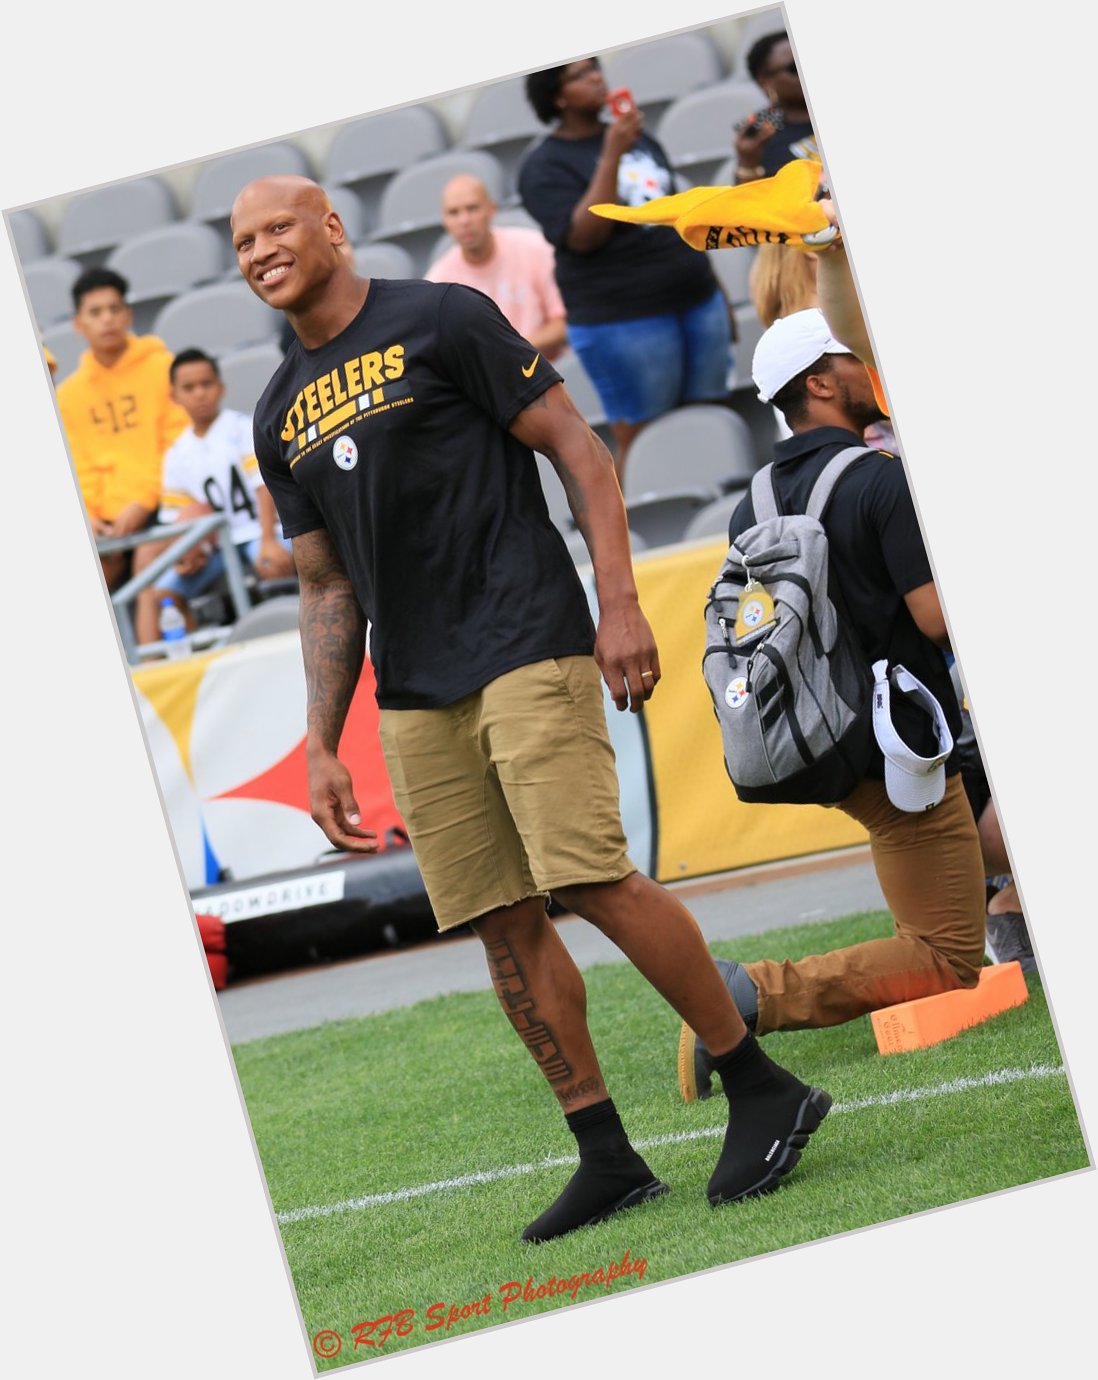   Happy Birthday wishes from Canada... . to the inspiring Ryan Shazier  